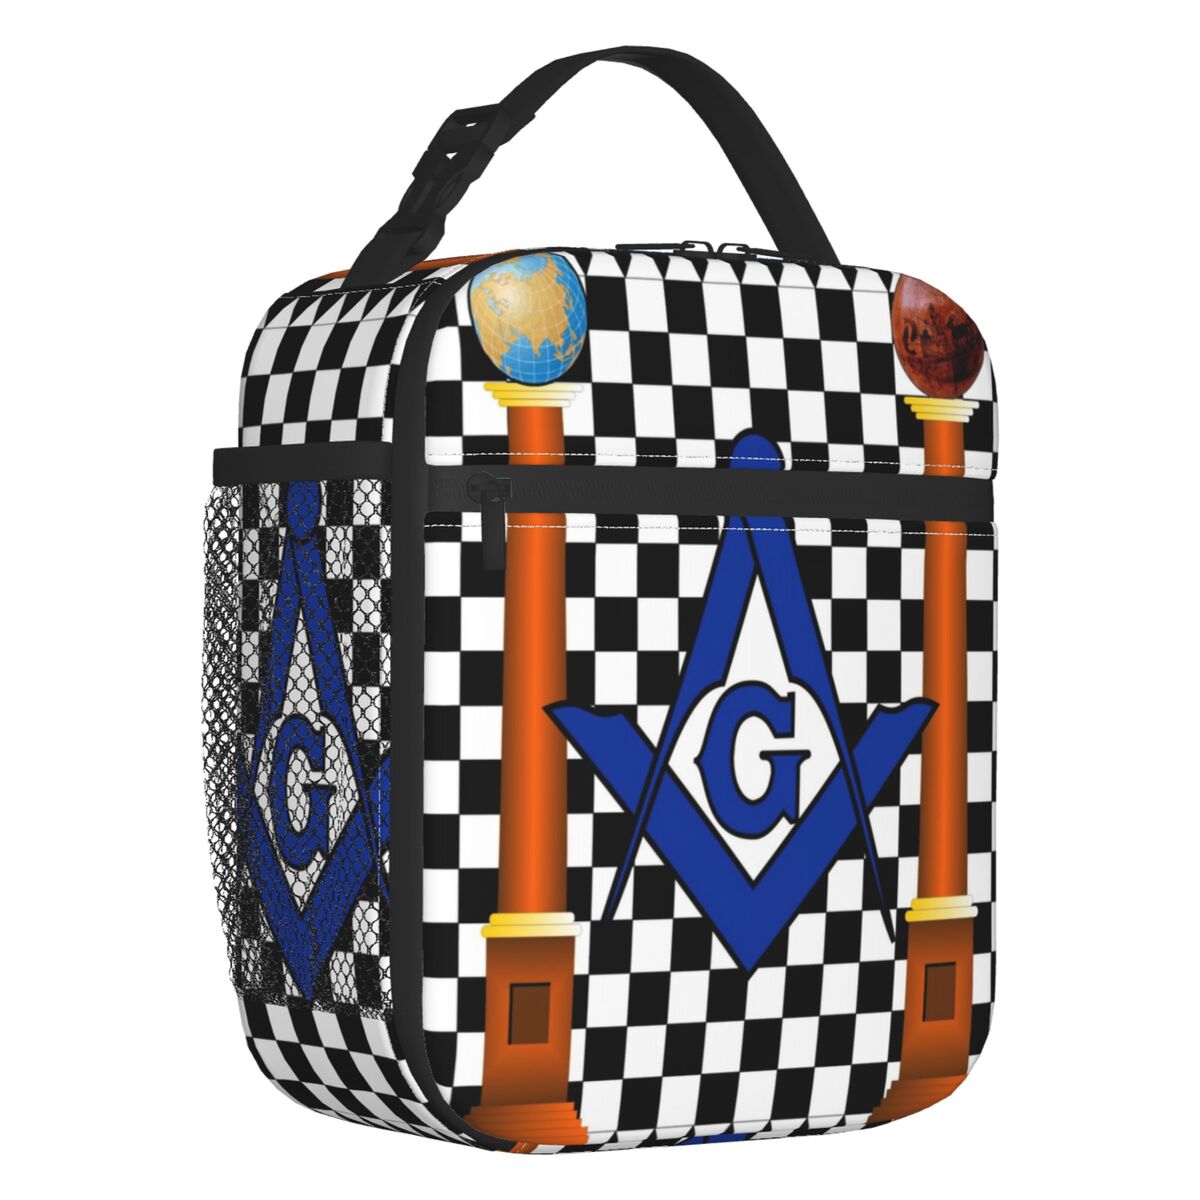 Master Mason Blue Lodge Lunch Bag - Thermal Insulated